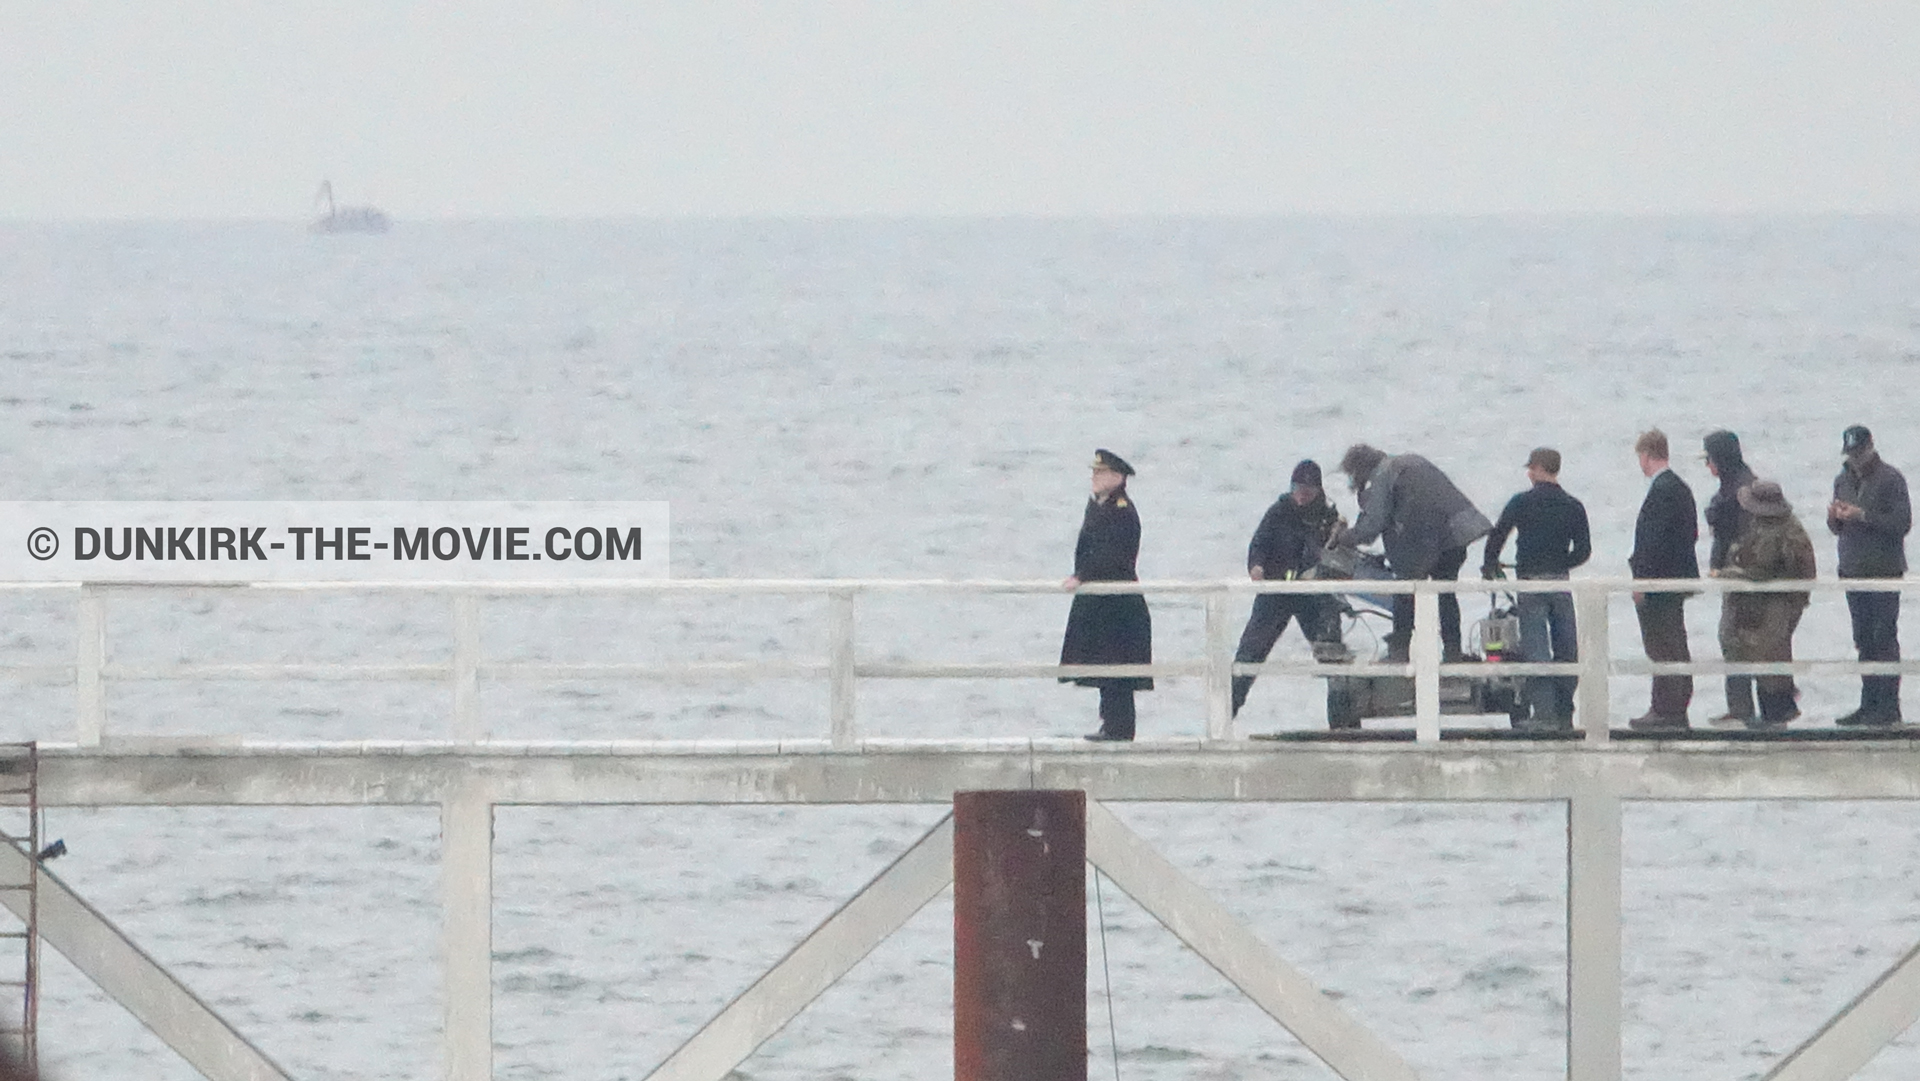 Picture with Hoyte van Hoytema, EST pier, Kenneth Branagh, Christopher Nolan,  from behind the scene of the Dunkirk movie by Nolan